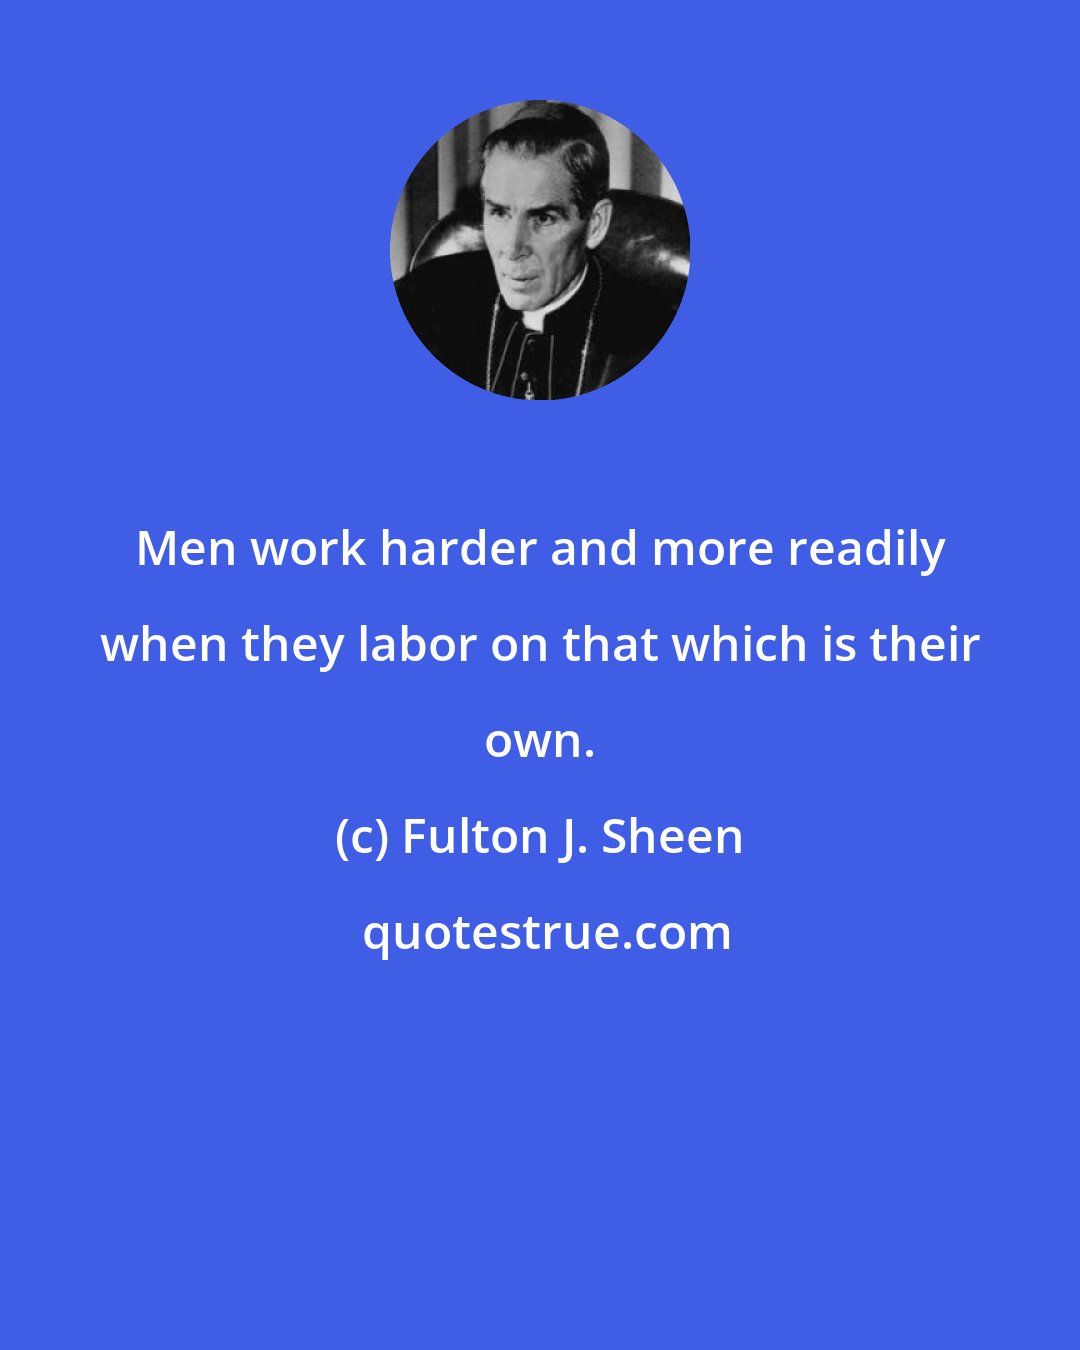 Fulton J. Sheen: Men work harder and more readily when they labor on that which is their own.